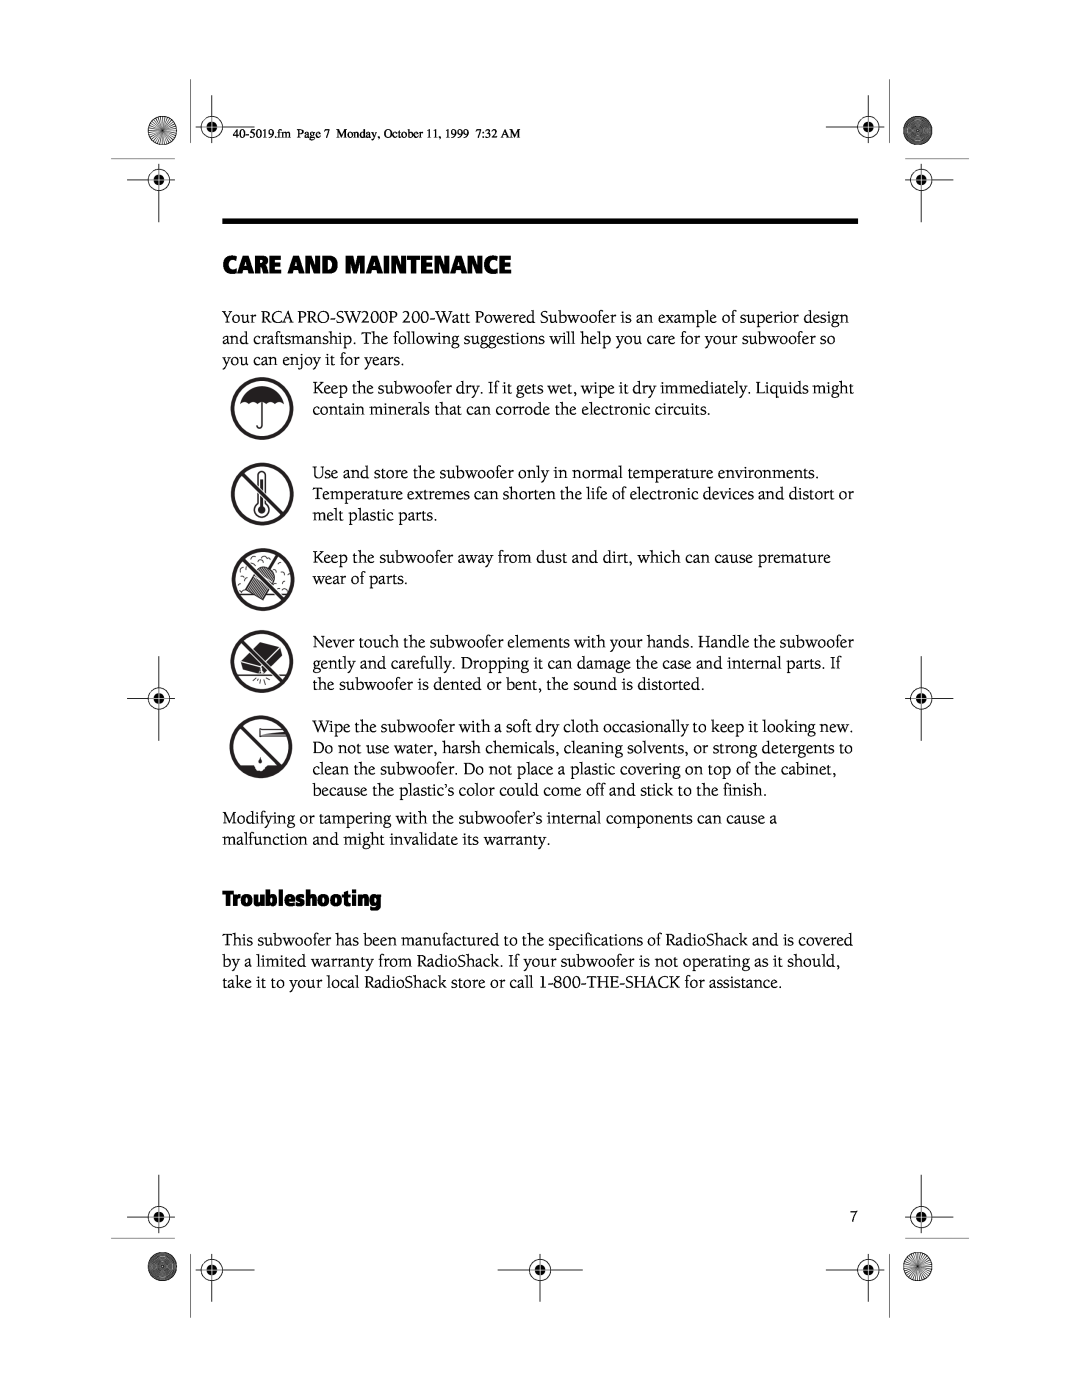 RCA SW200P manual Care And Maintenance, Troubleshooting 